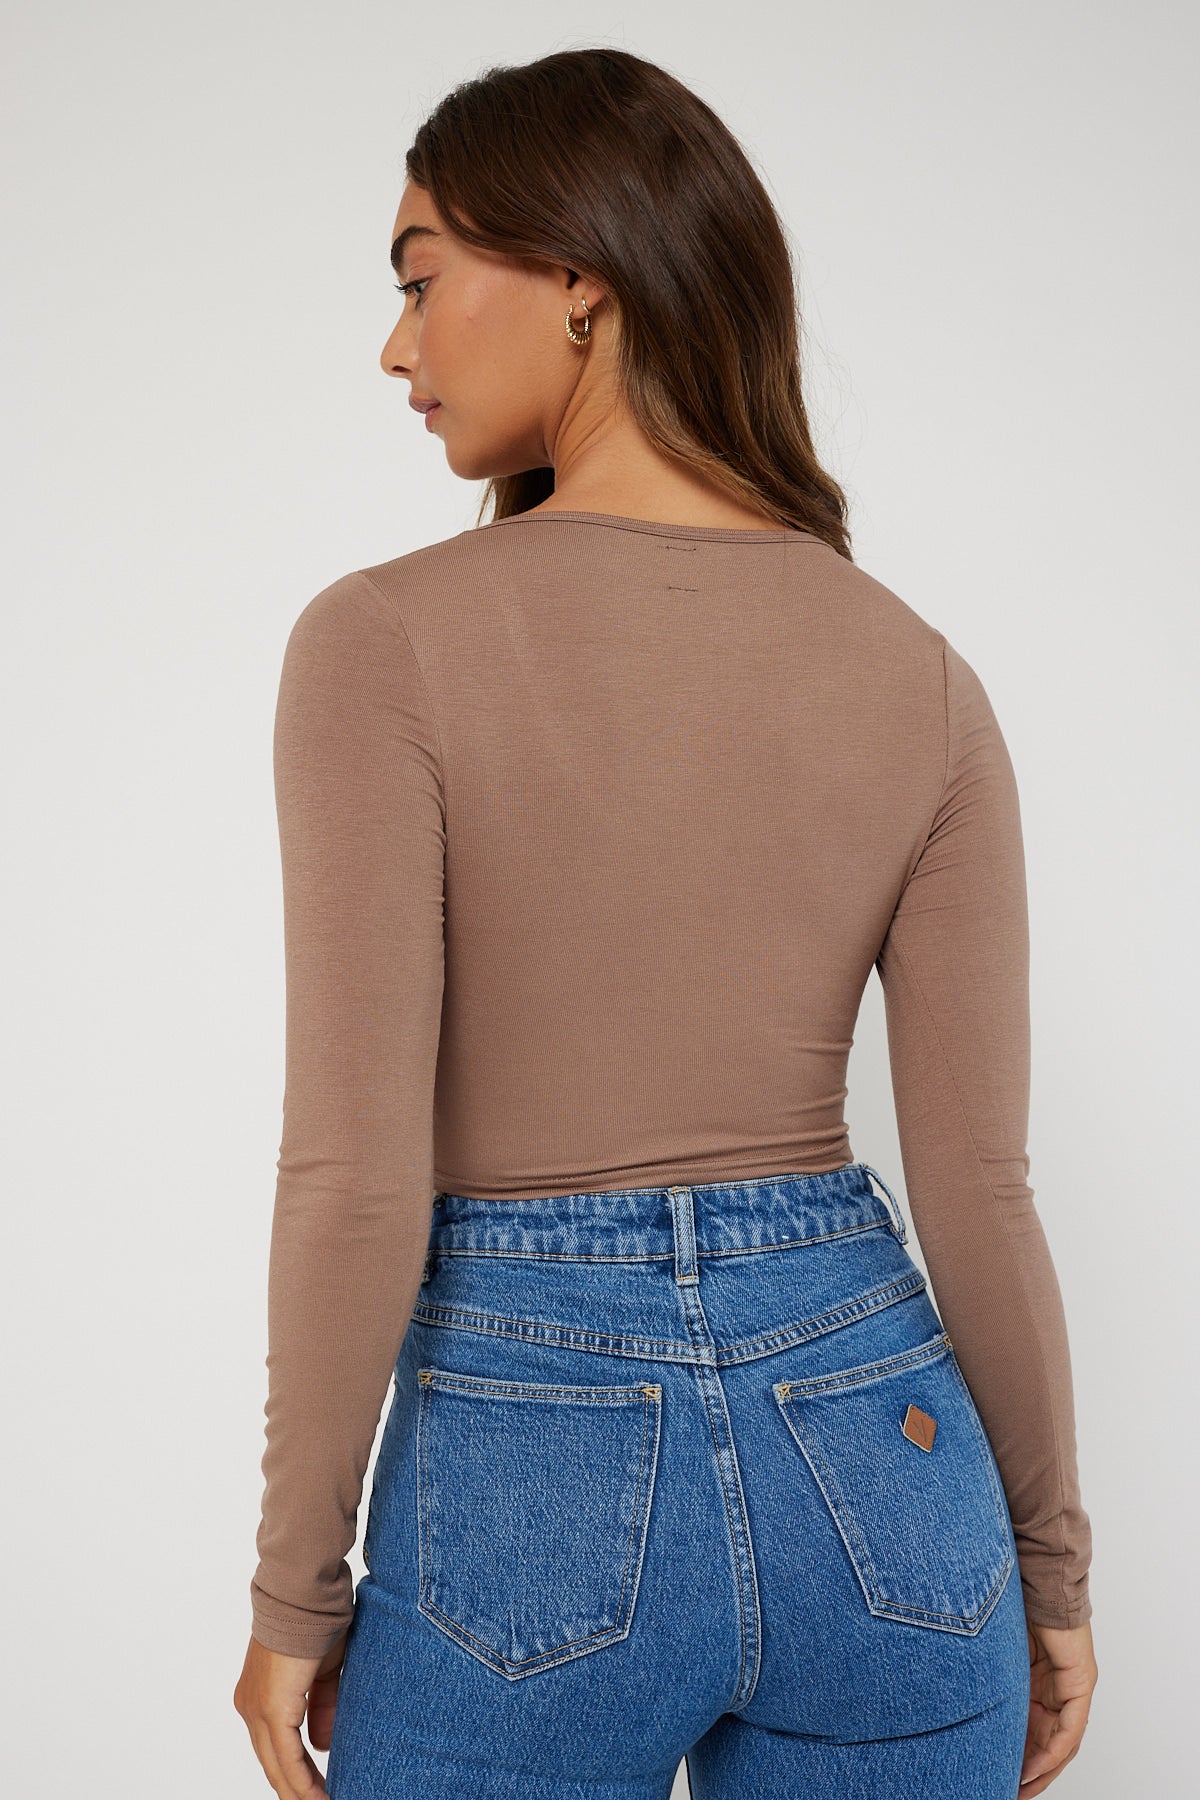 L&t Scoop Neck Long Sleeve Top Taupe